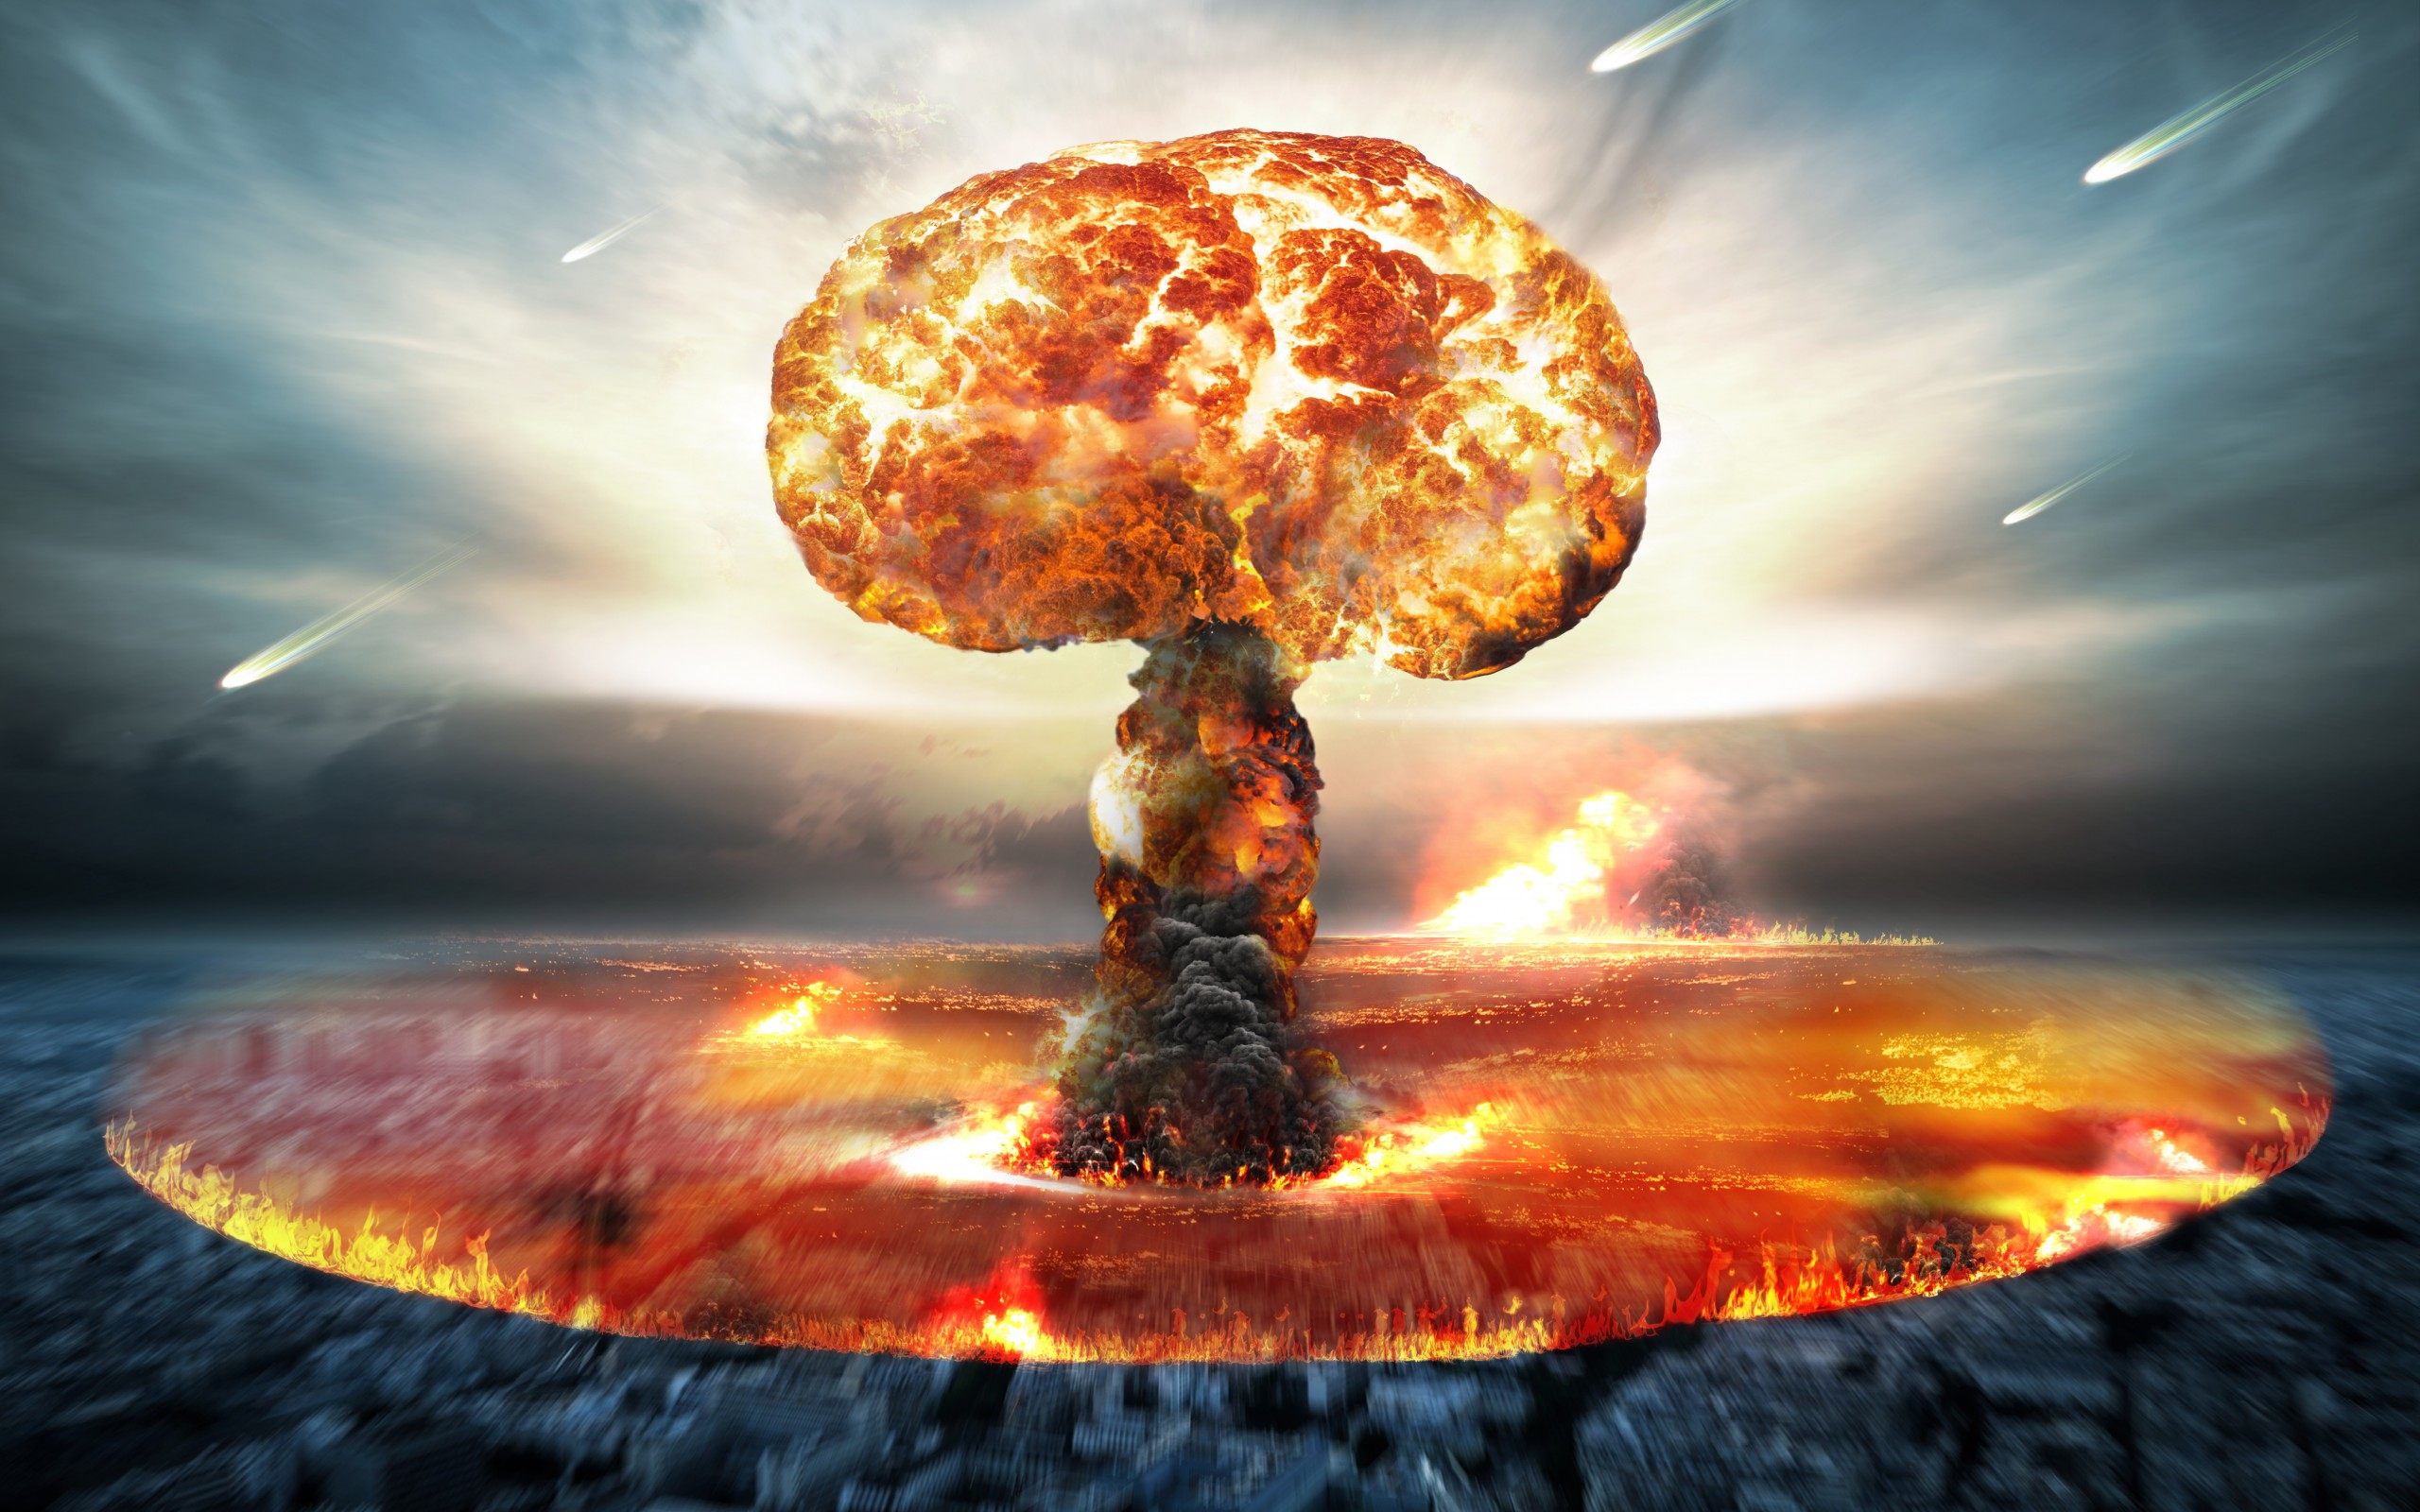 Nuclear Explosion Wallpaper For Desktop Of Bomb